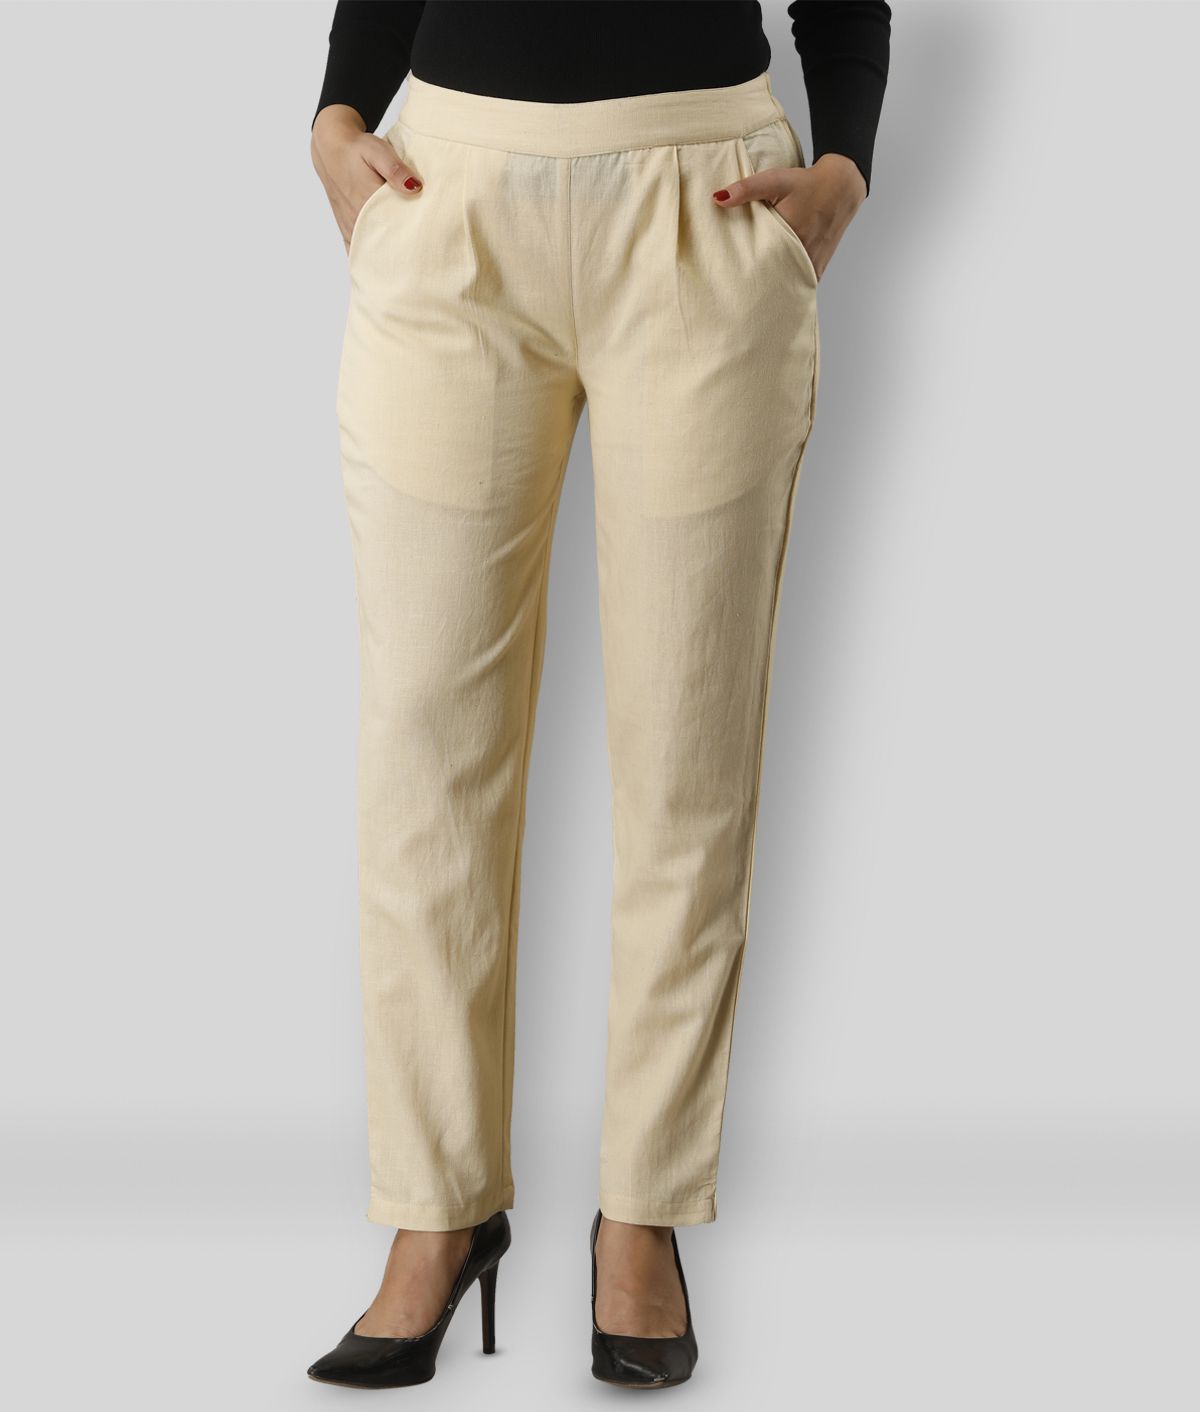     			SVARCHI - Beige Cotton Blend Straight Fit Women's Casual Pants  ( Pack of 1 )